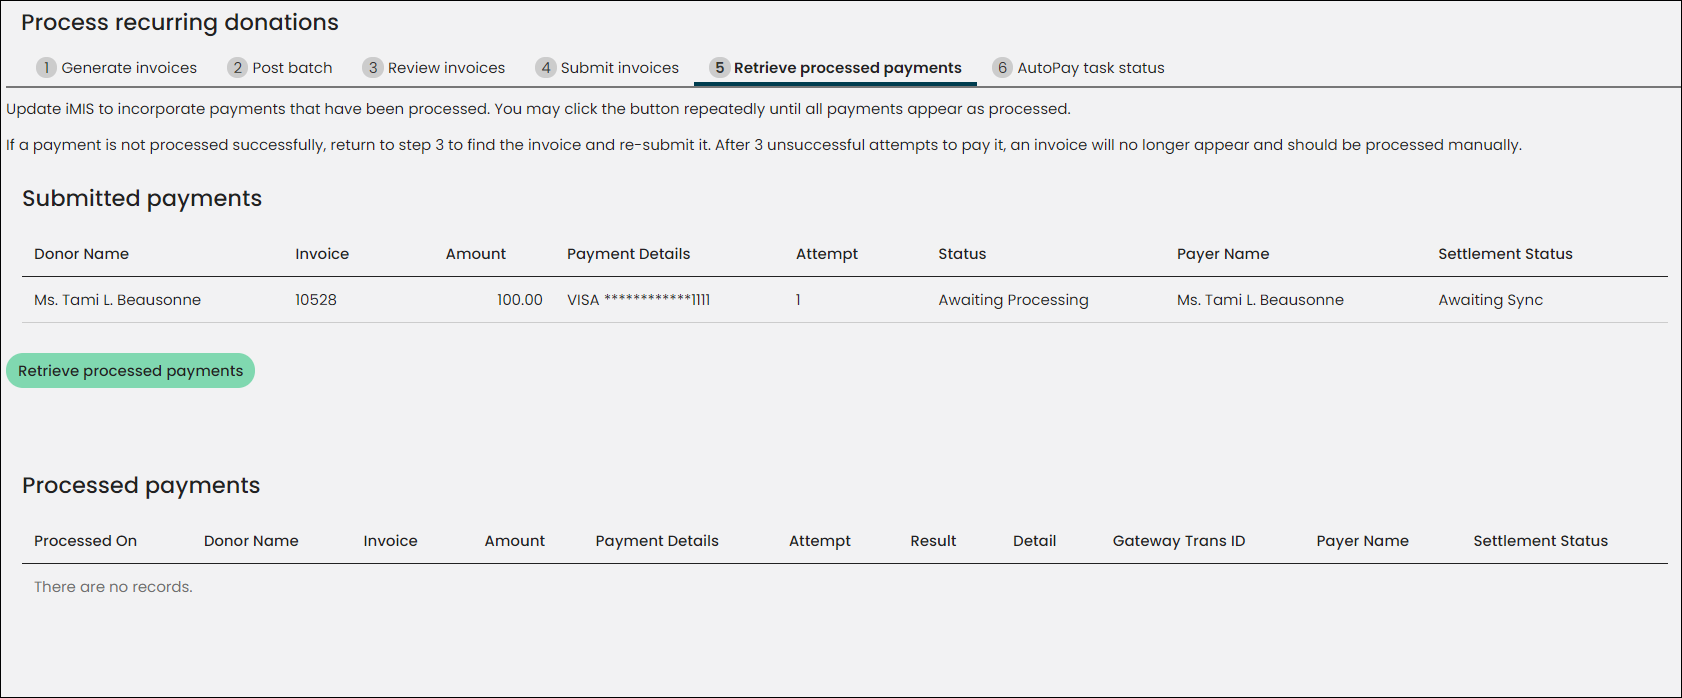 Retrieving processed payments from the Process recurring donations window